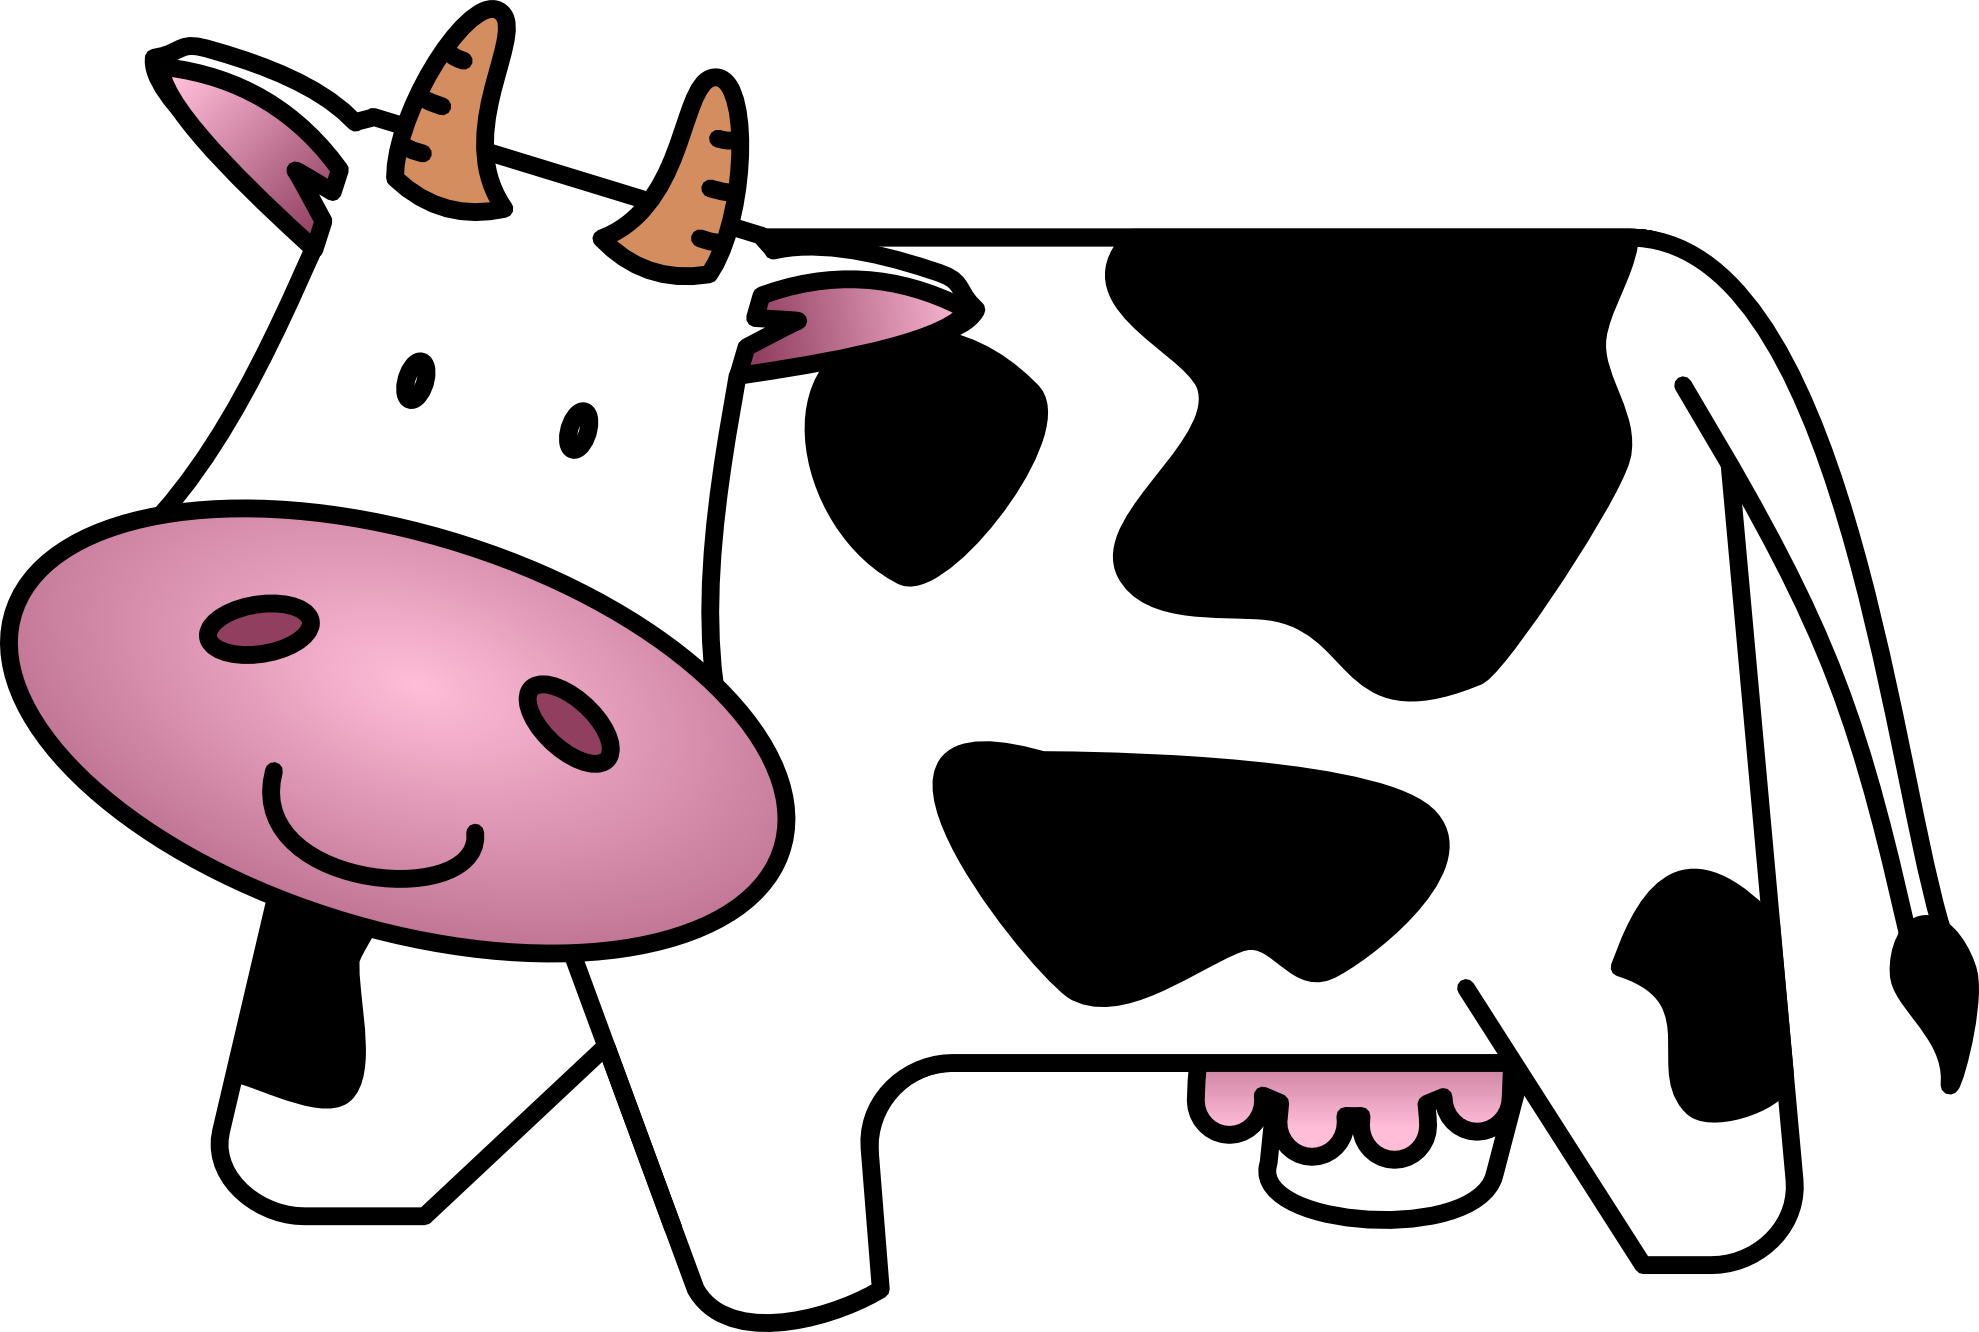 cow clip art free download - photo #13